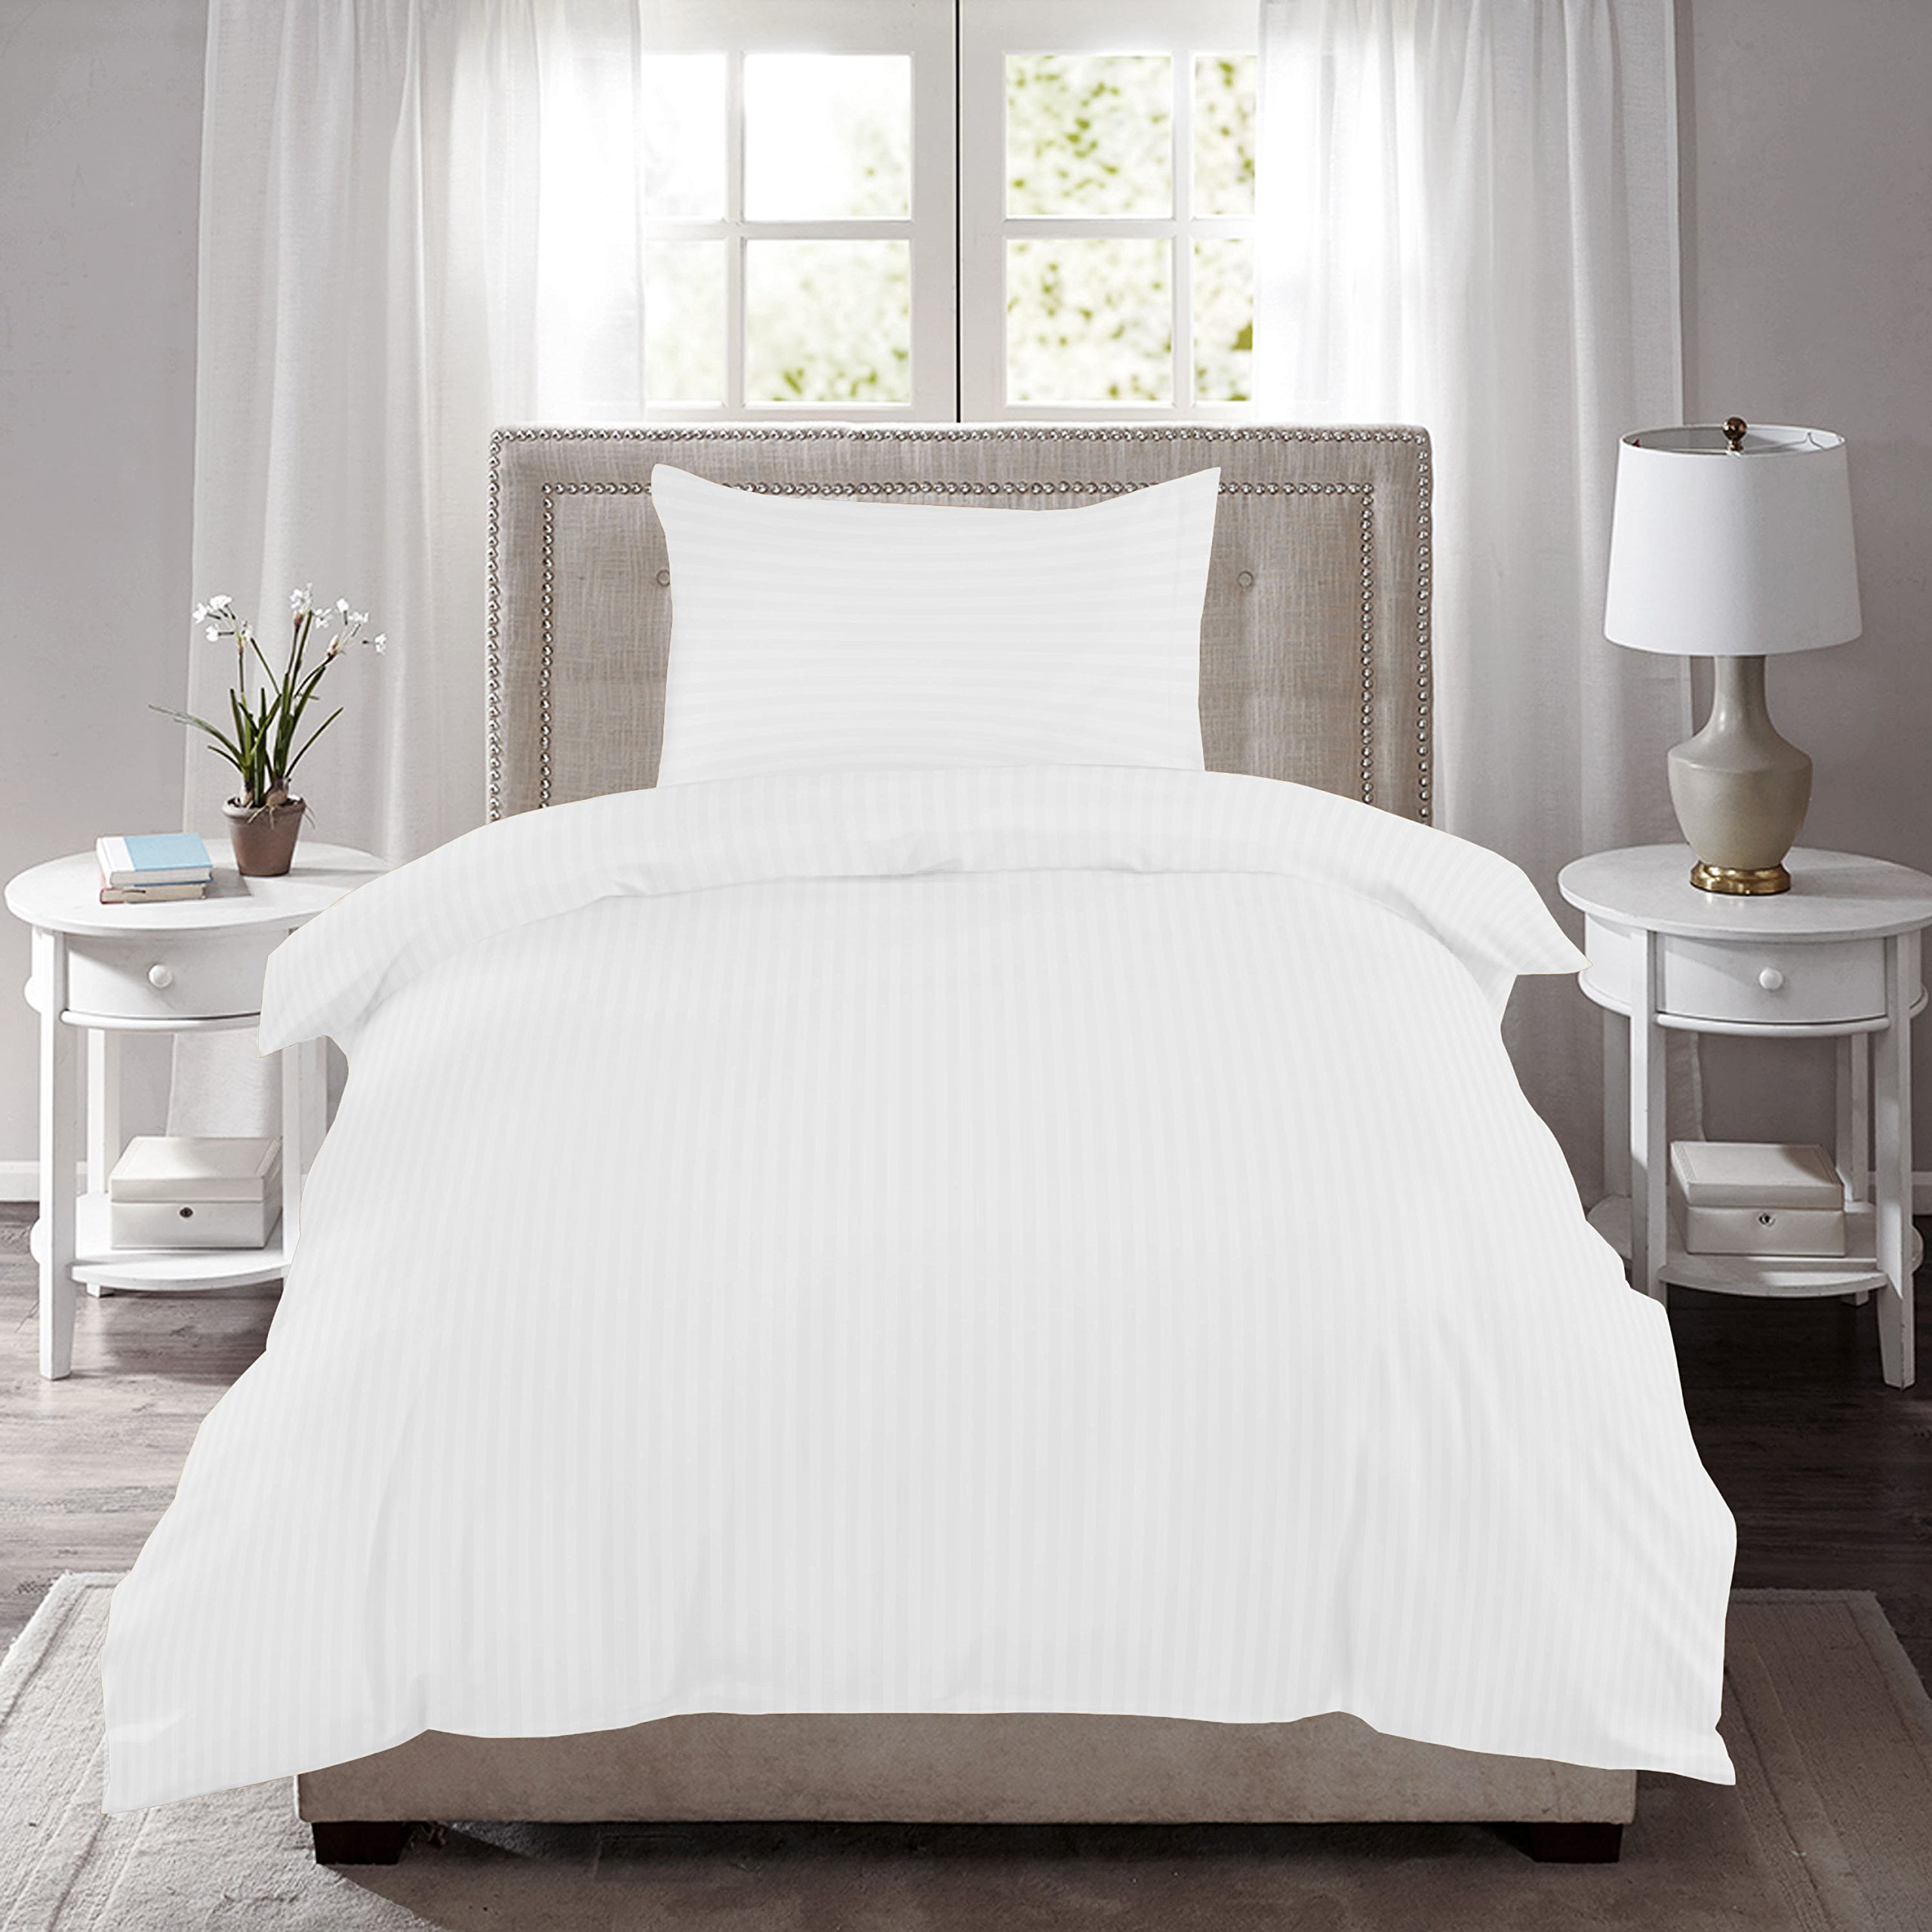 Peave Uitstroom drijvend HUESLAND by Ahmedabad Cotton 220 TC Single Bed Sheet with 1 Pillow Cover  Striped Cotton Sateen Collection - 60 x 90 inches, White - Walmart.com